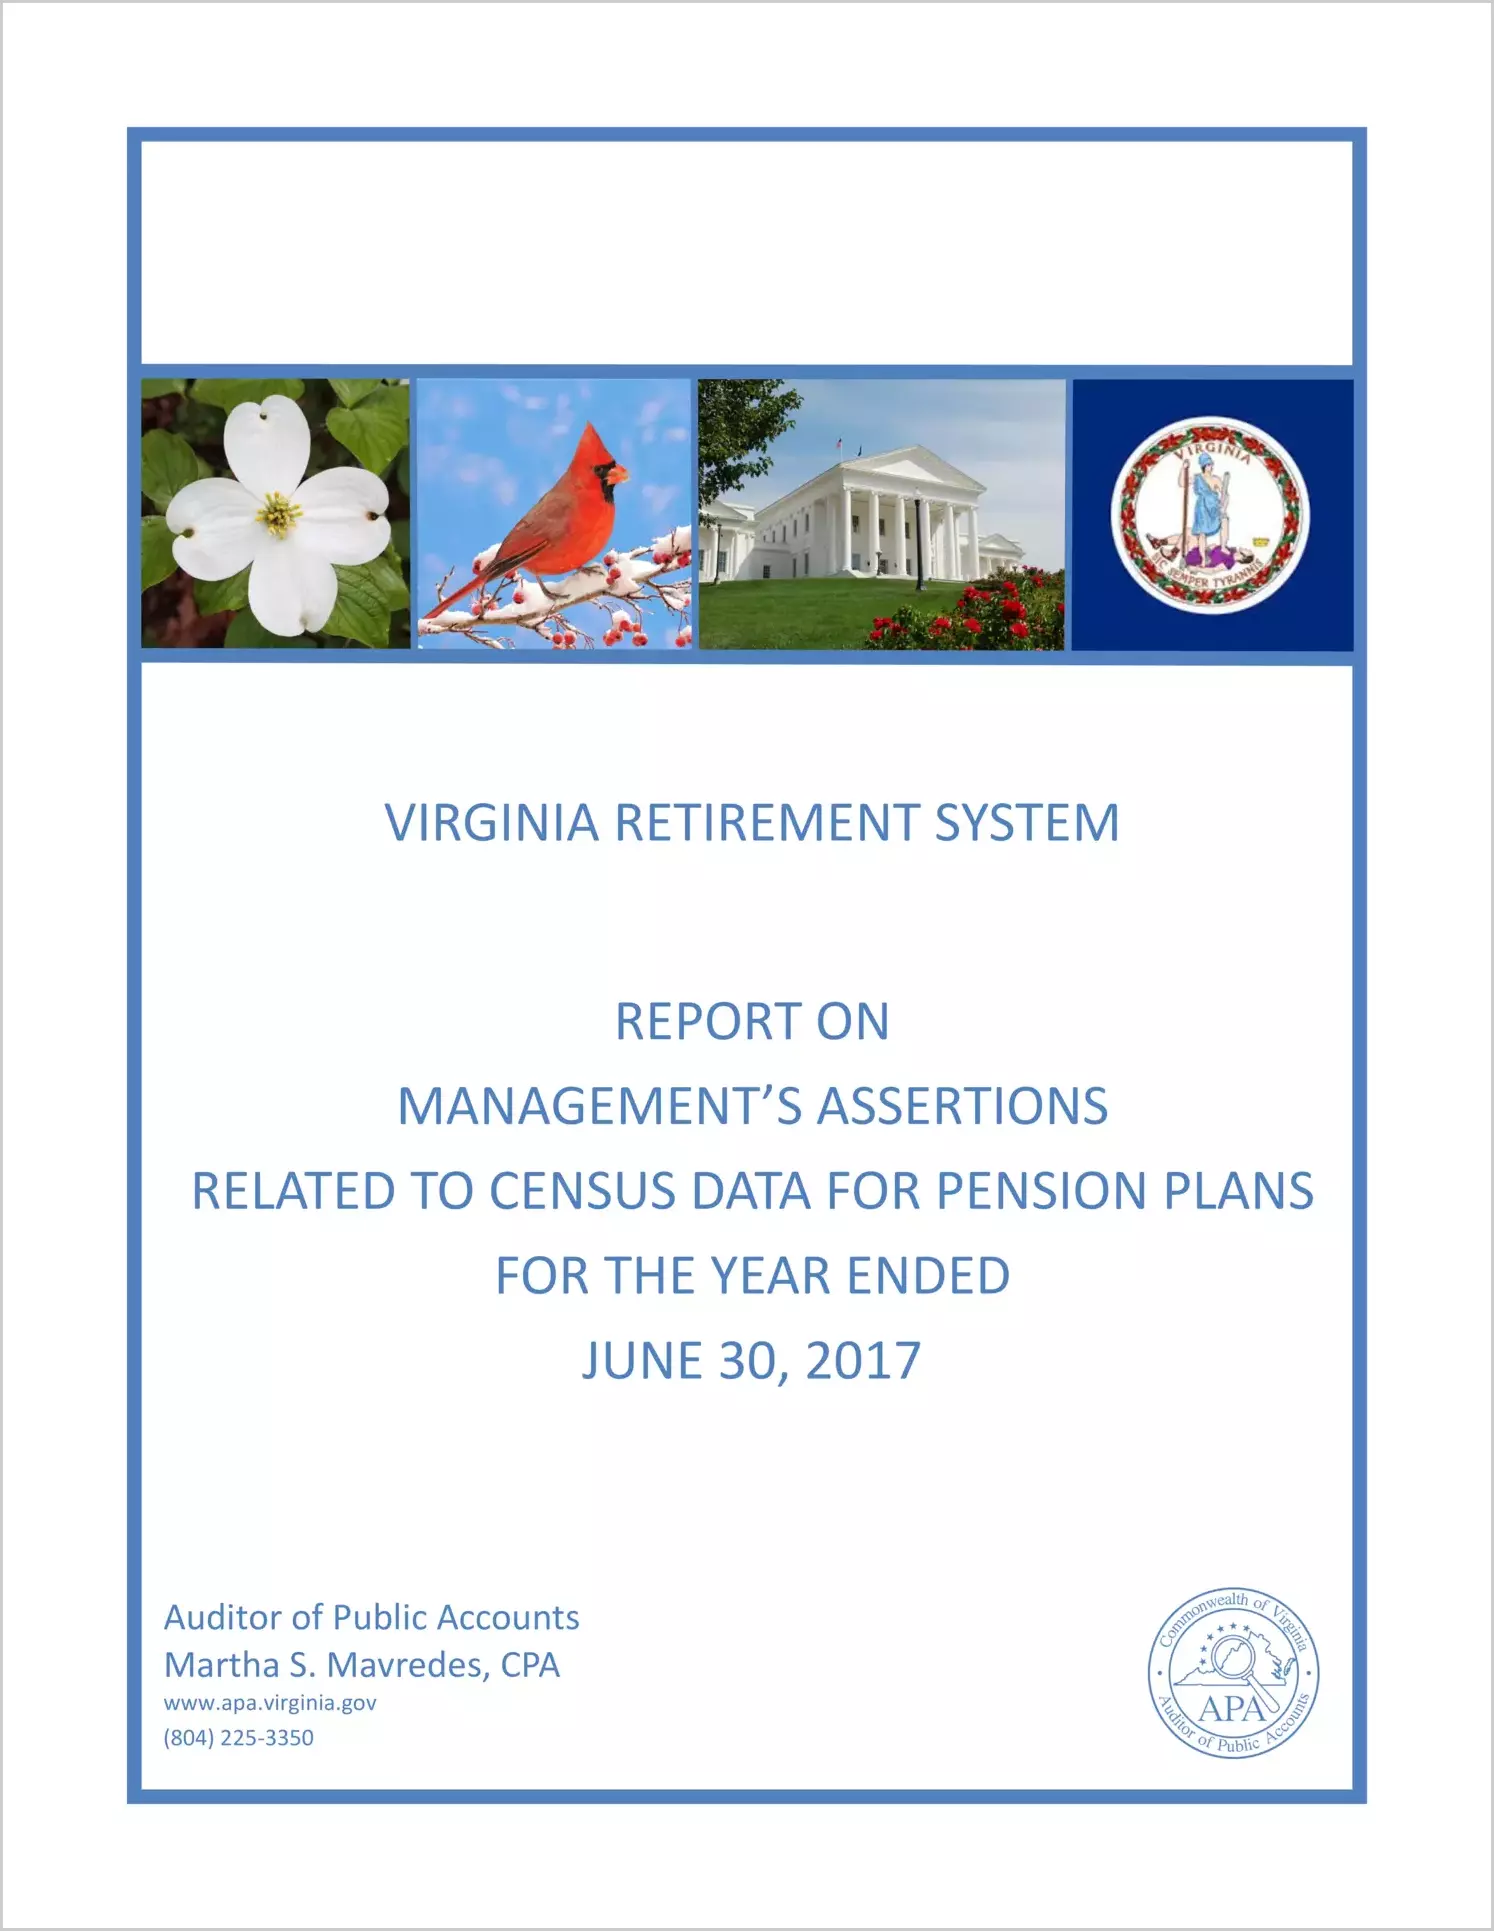 APA Report on VRS Management Assertions Related to Census Data Pension for the year ended 6/30/2017